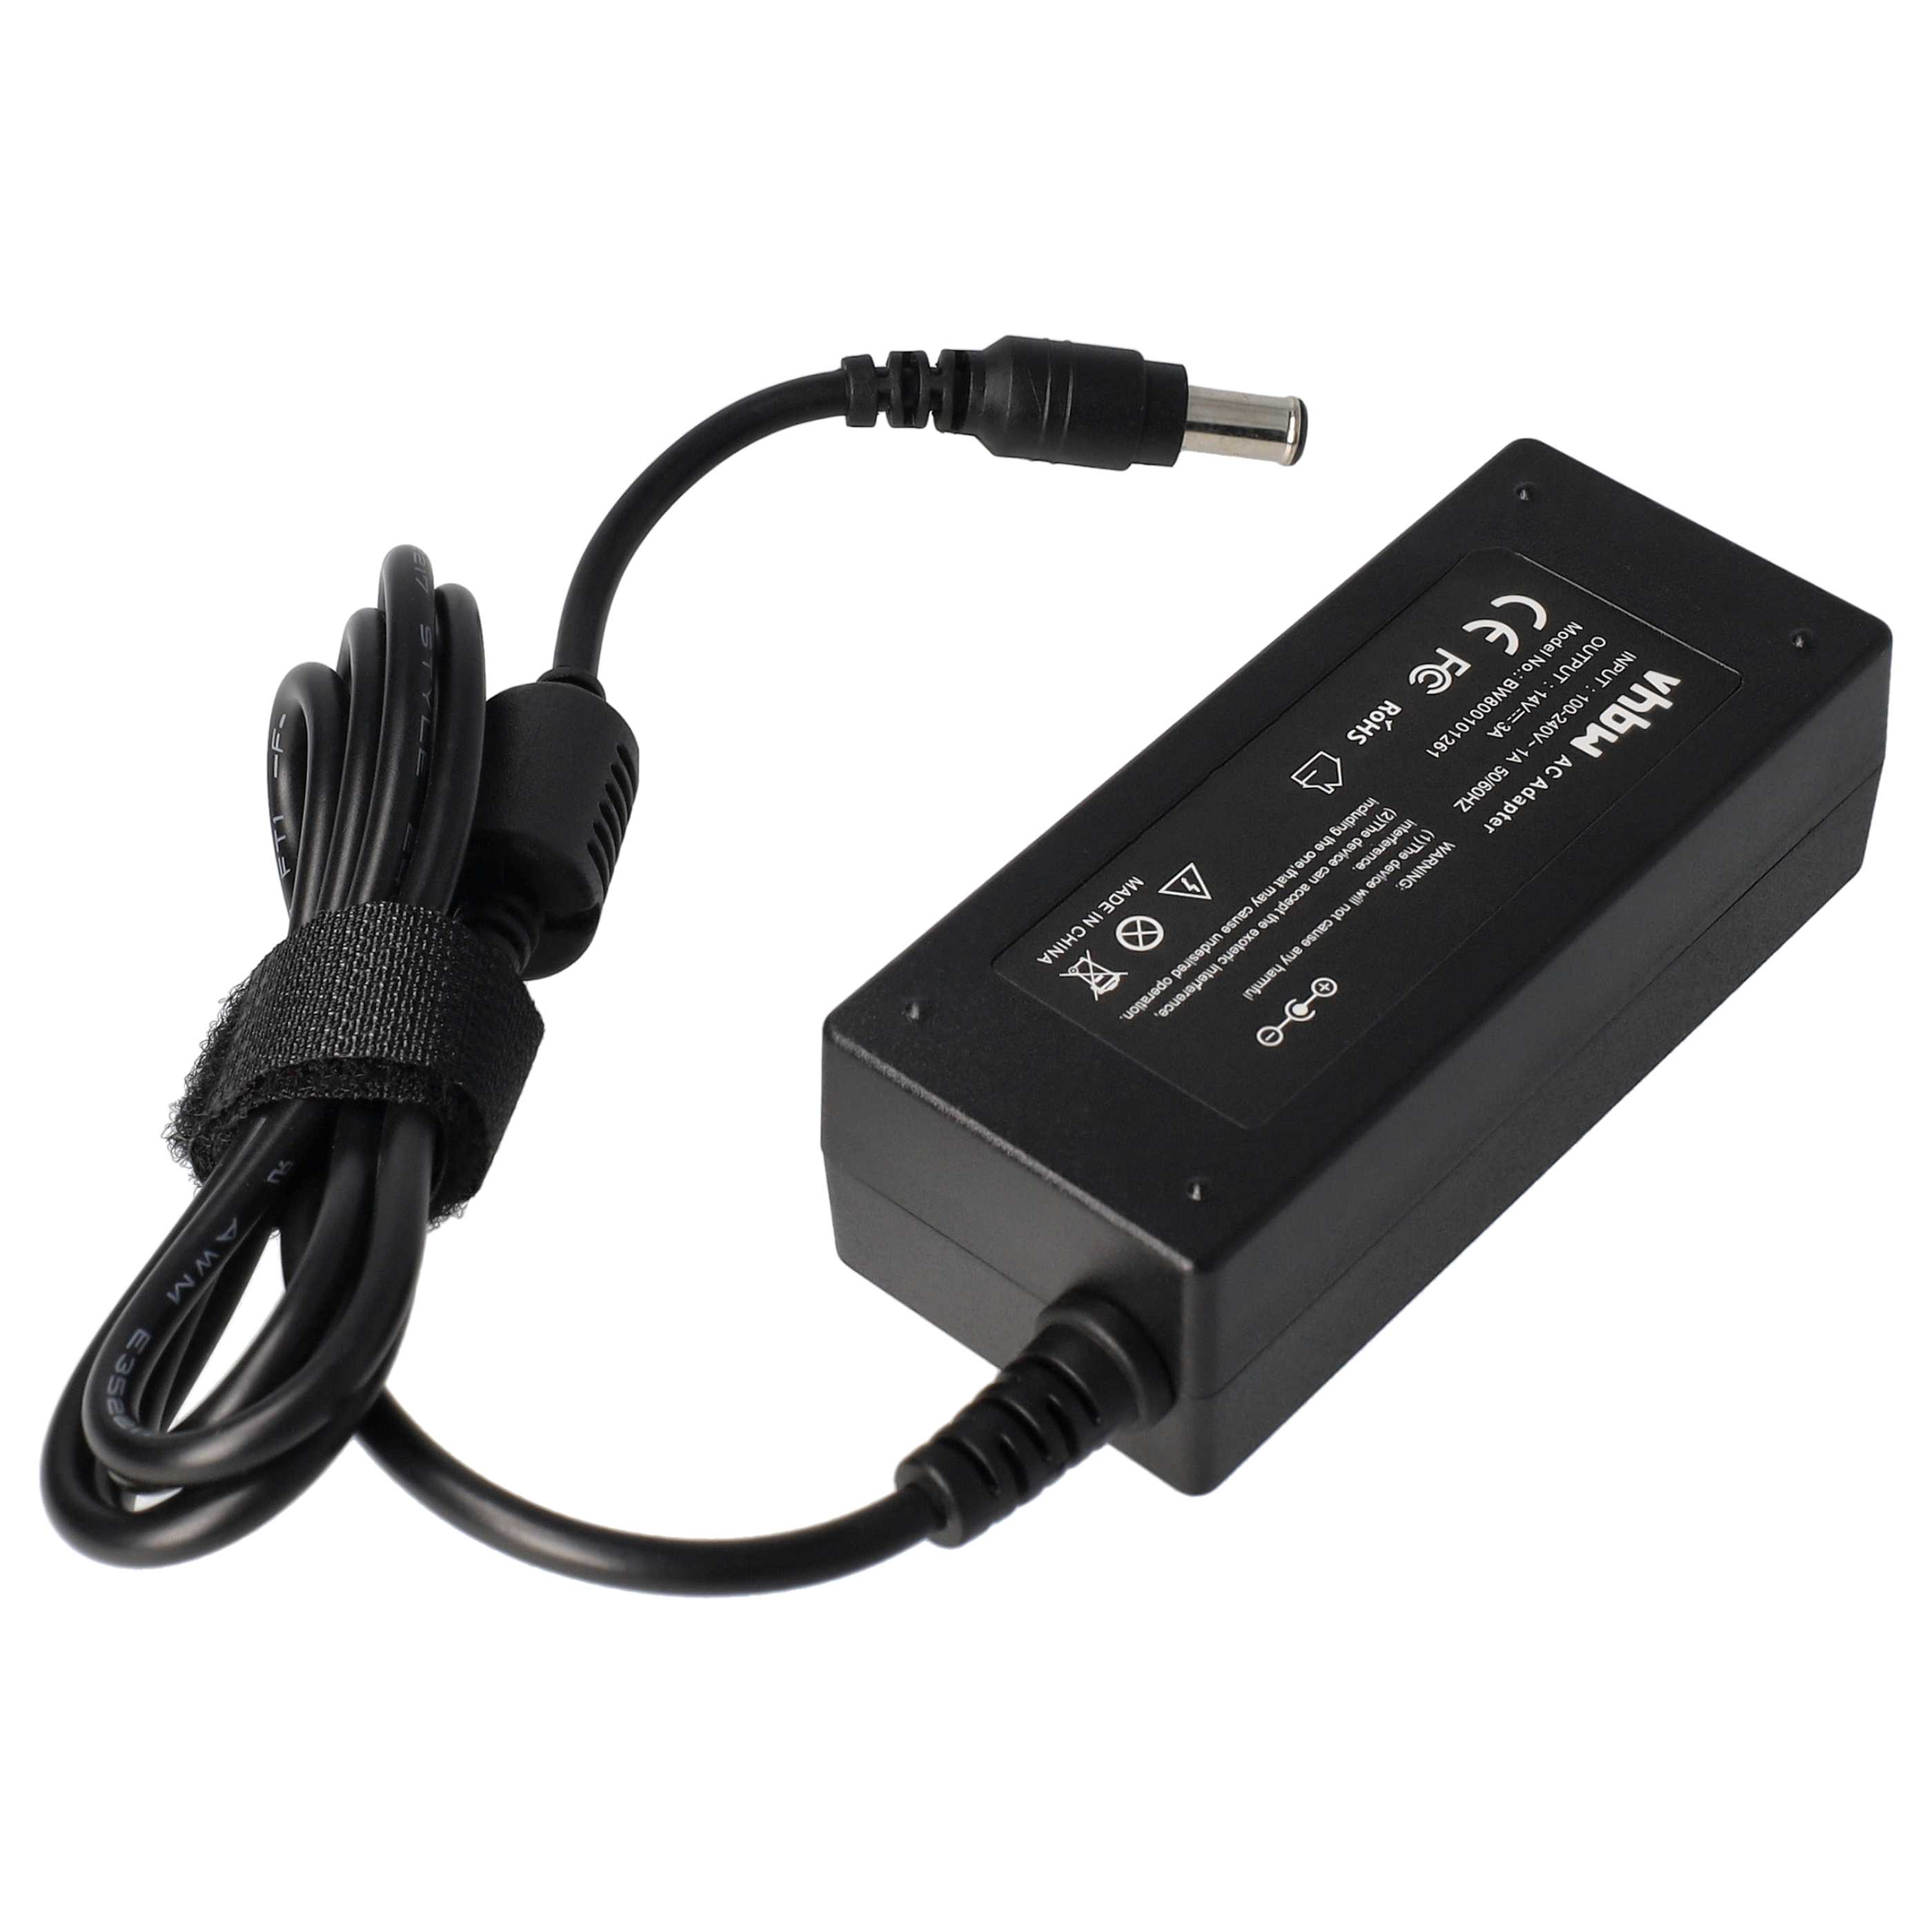 Mains Power Adapter replaces Samsung AD-3014STN, ADS-30NJ-12, AD-4214N, AD-4214L for Samsung Monitor - 200 cm